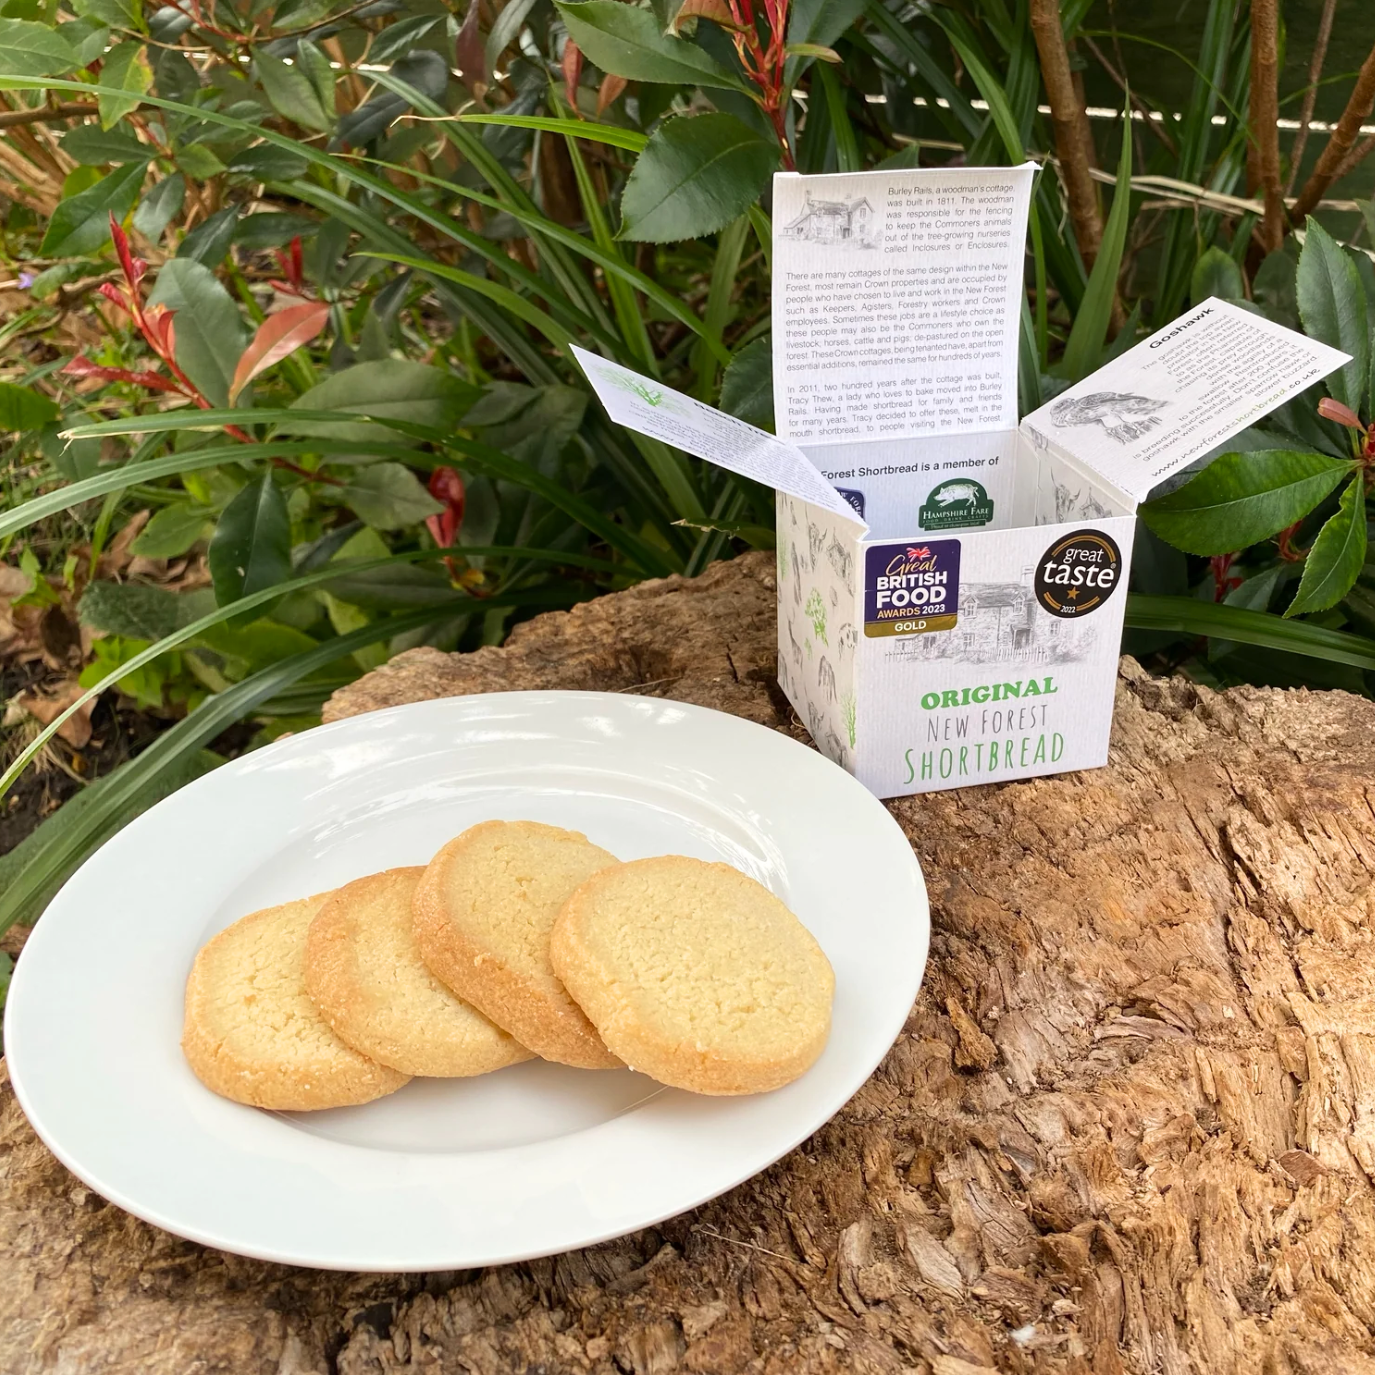 Shortbread Rounds | New Forest Shortbread | Foodie Gifts